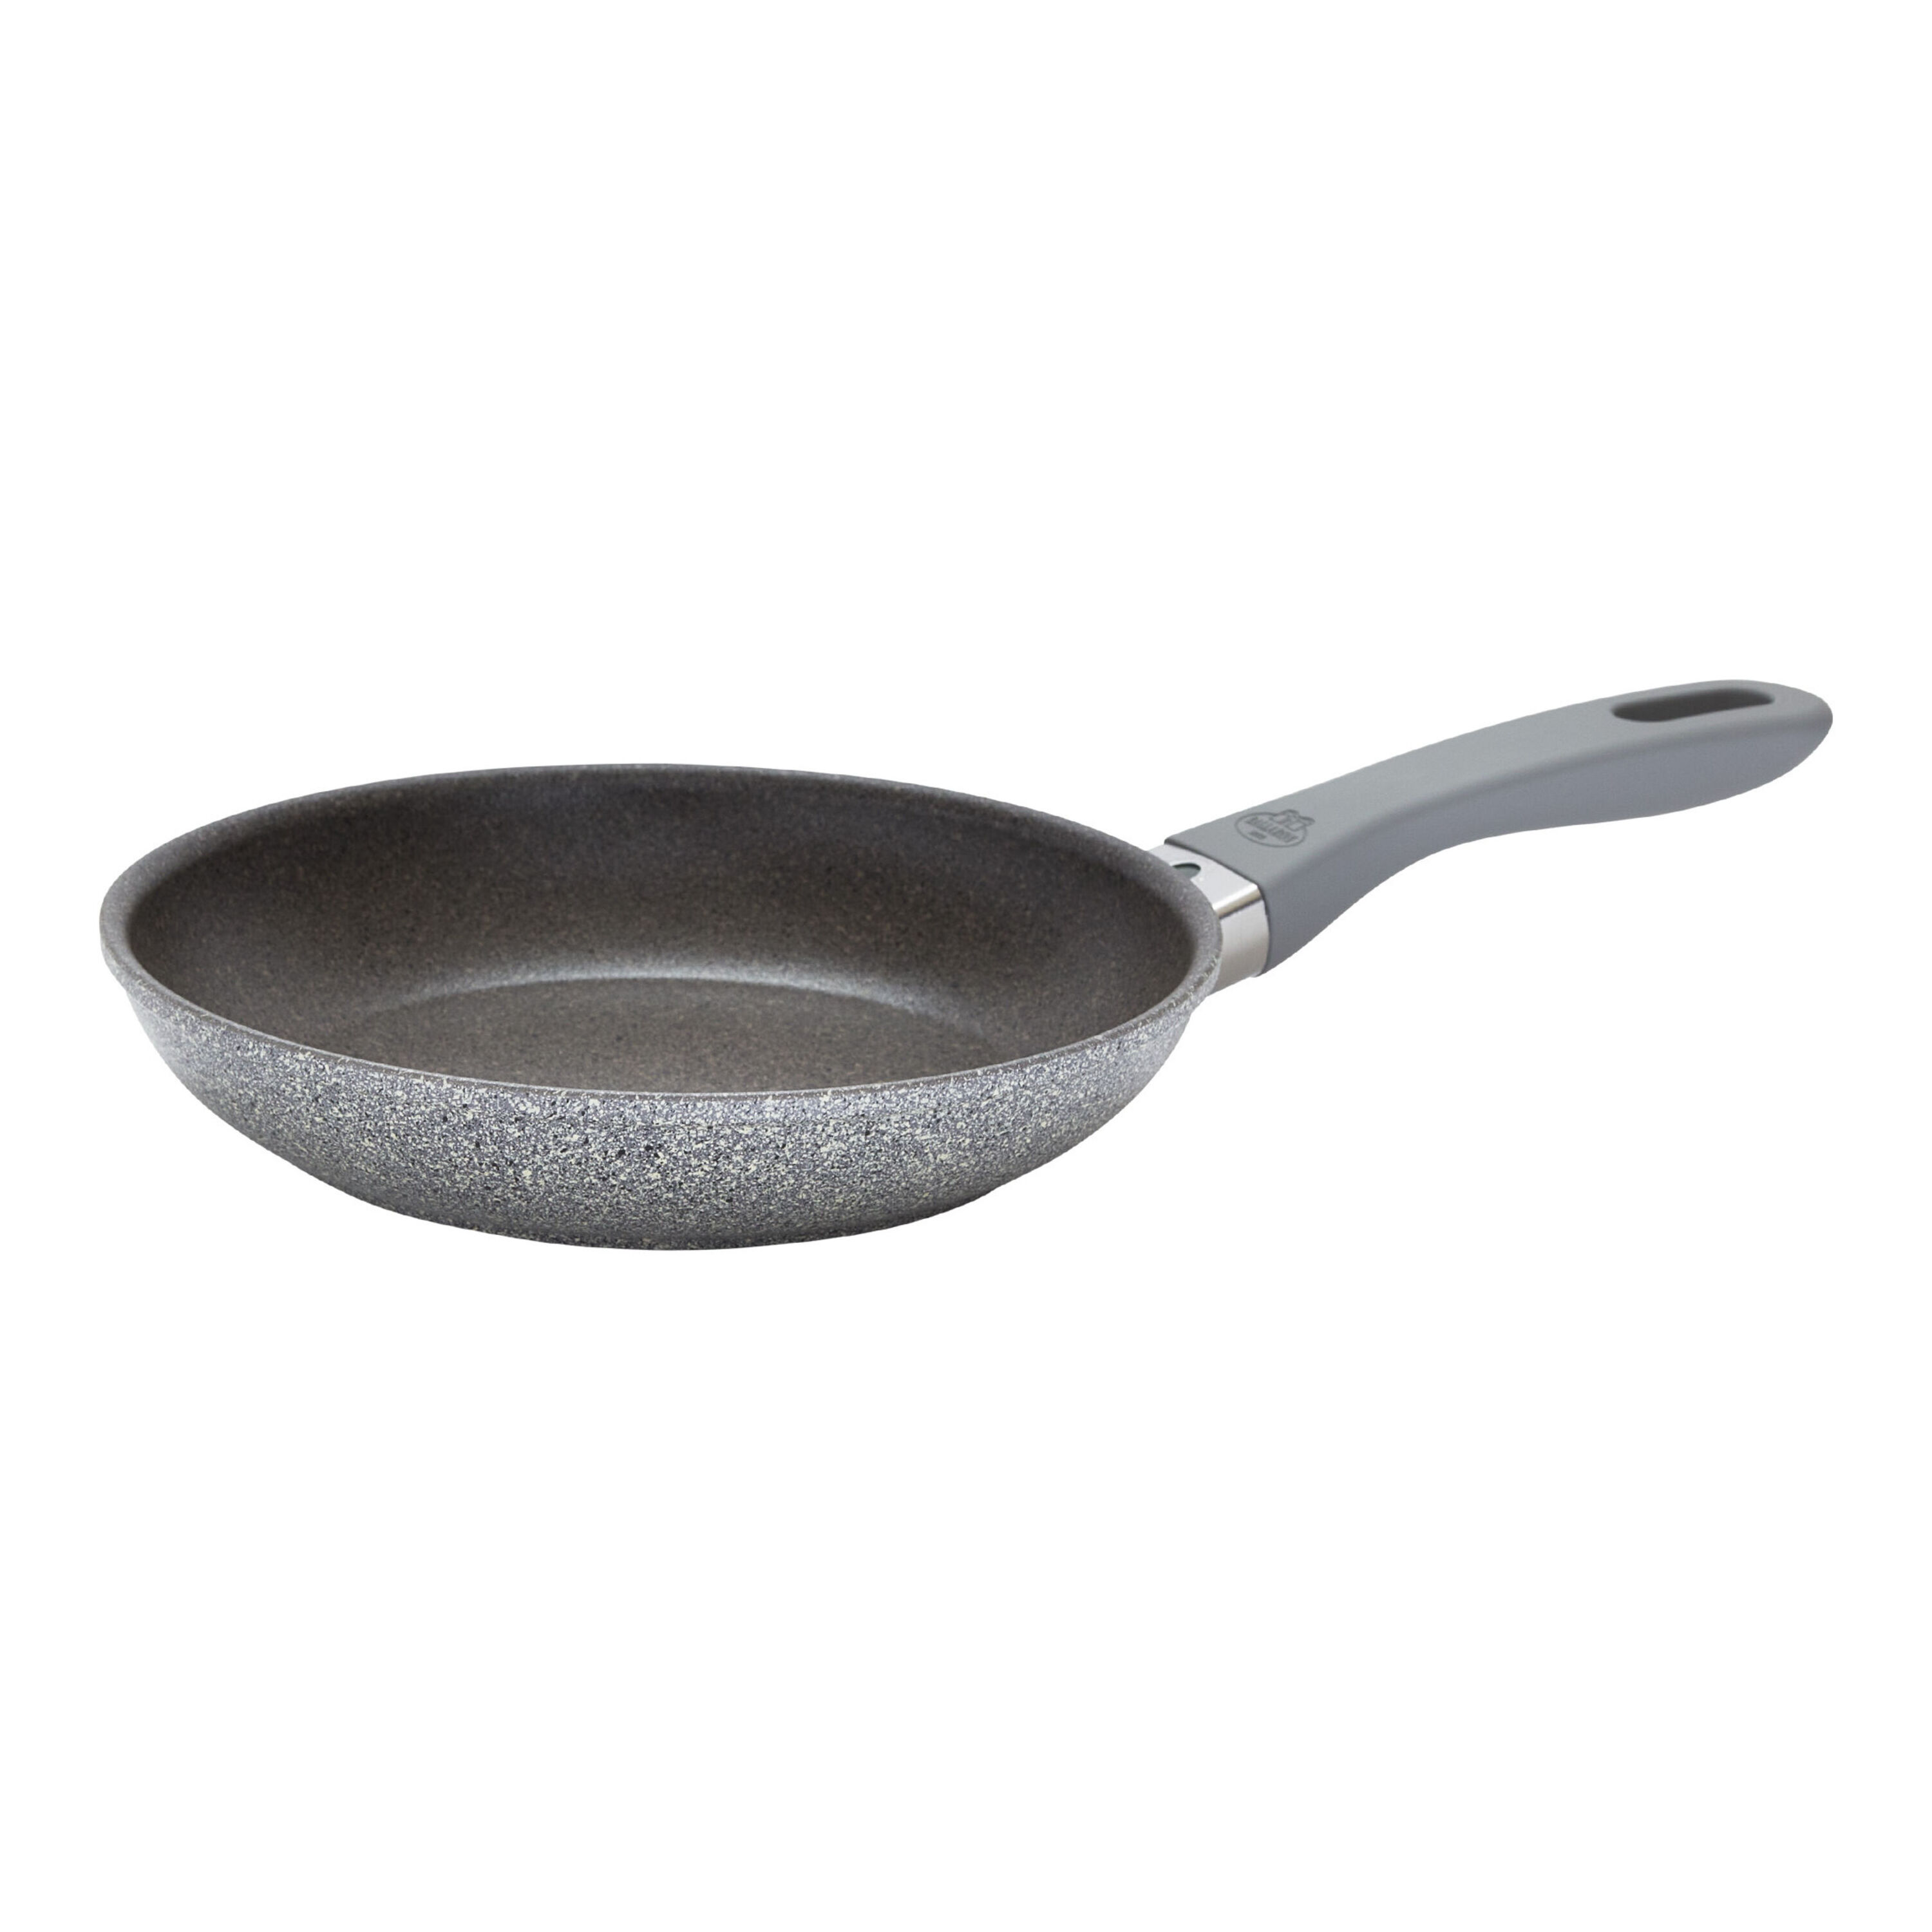 ZWILLING Forte 8-inch, aluminum, Non-stick, Frying pan